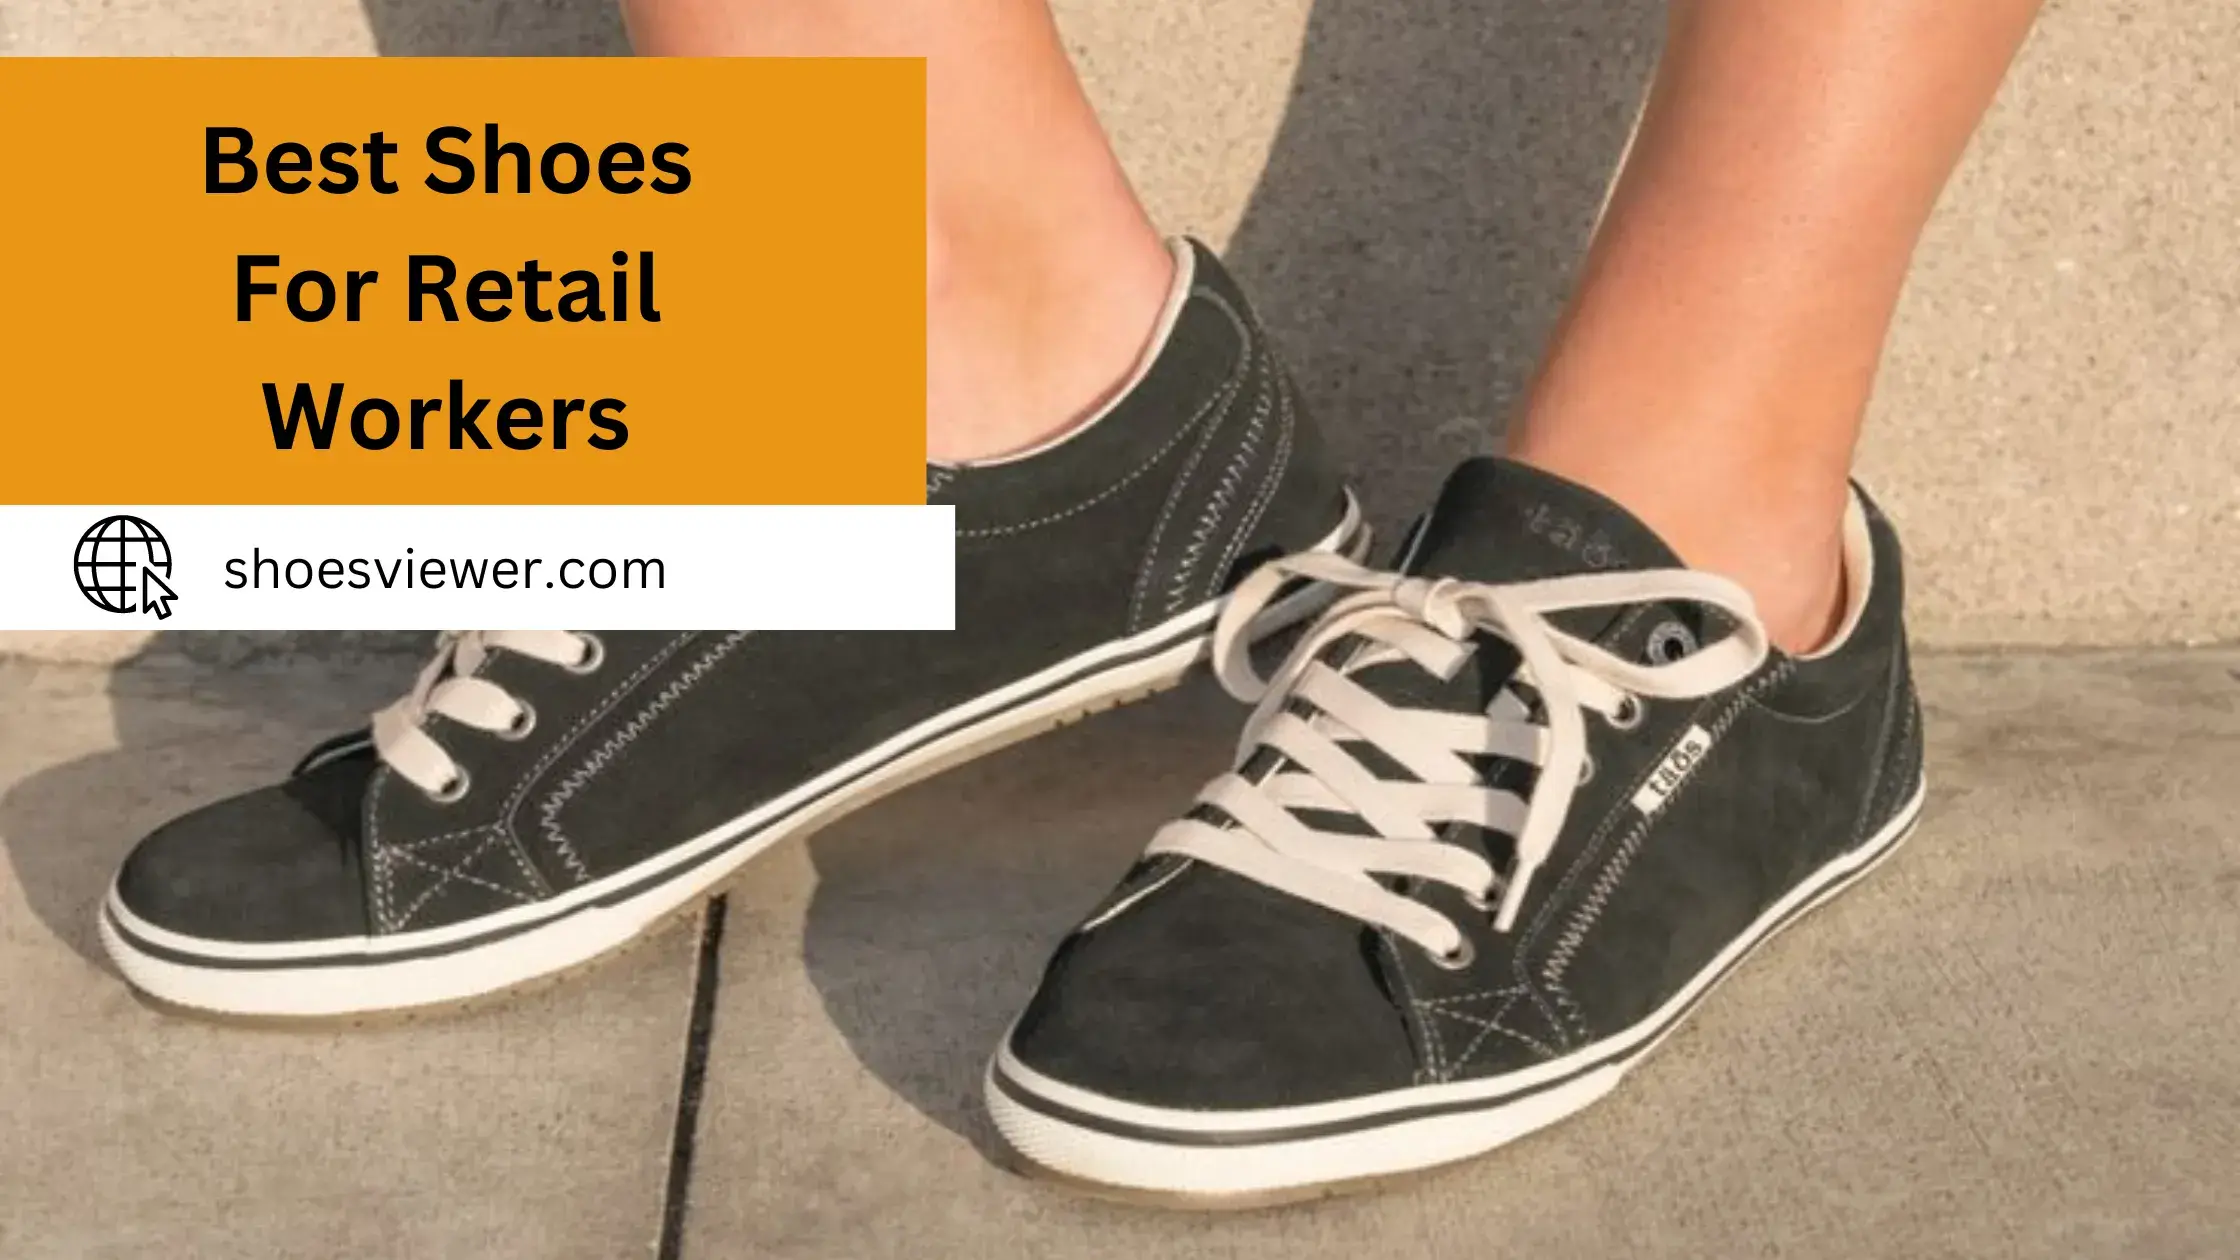 Best Shoes For Retail Workers - A Comprehensive Guide